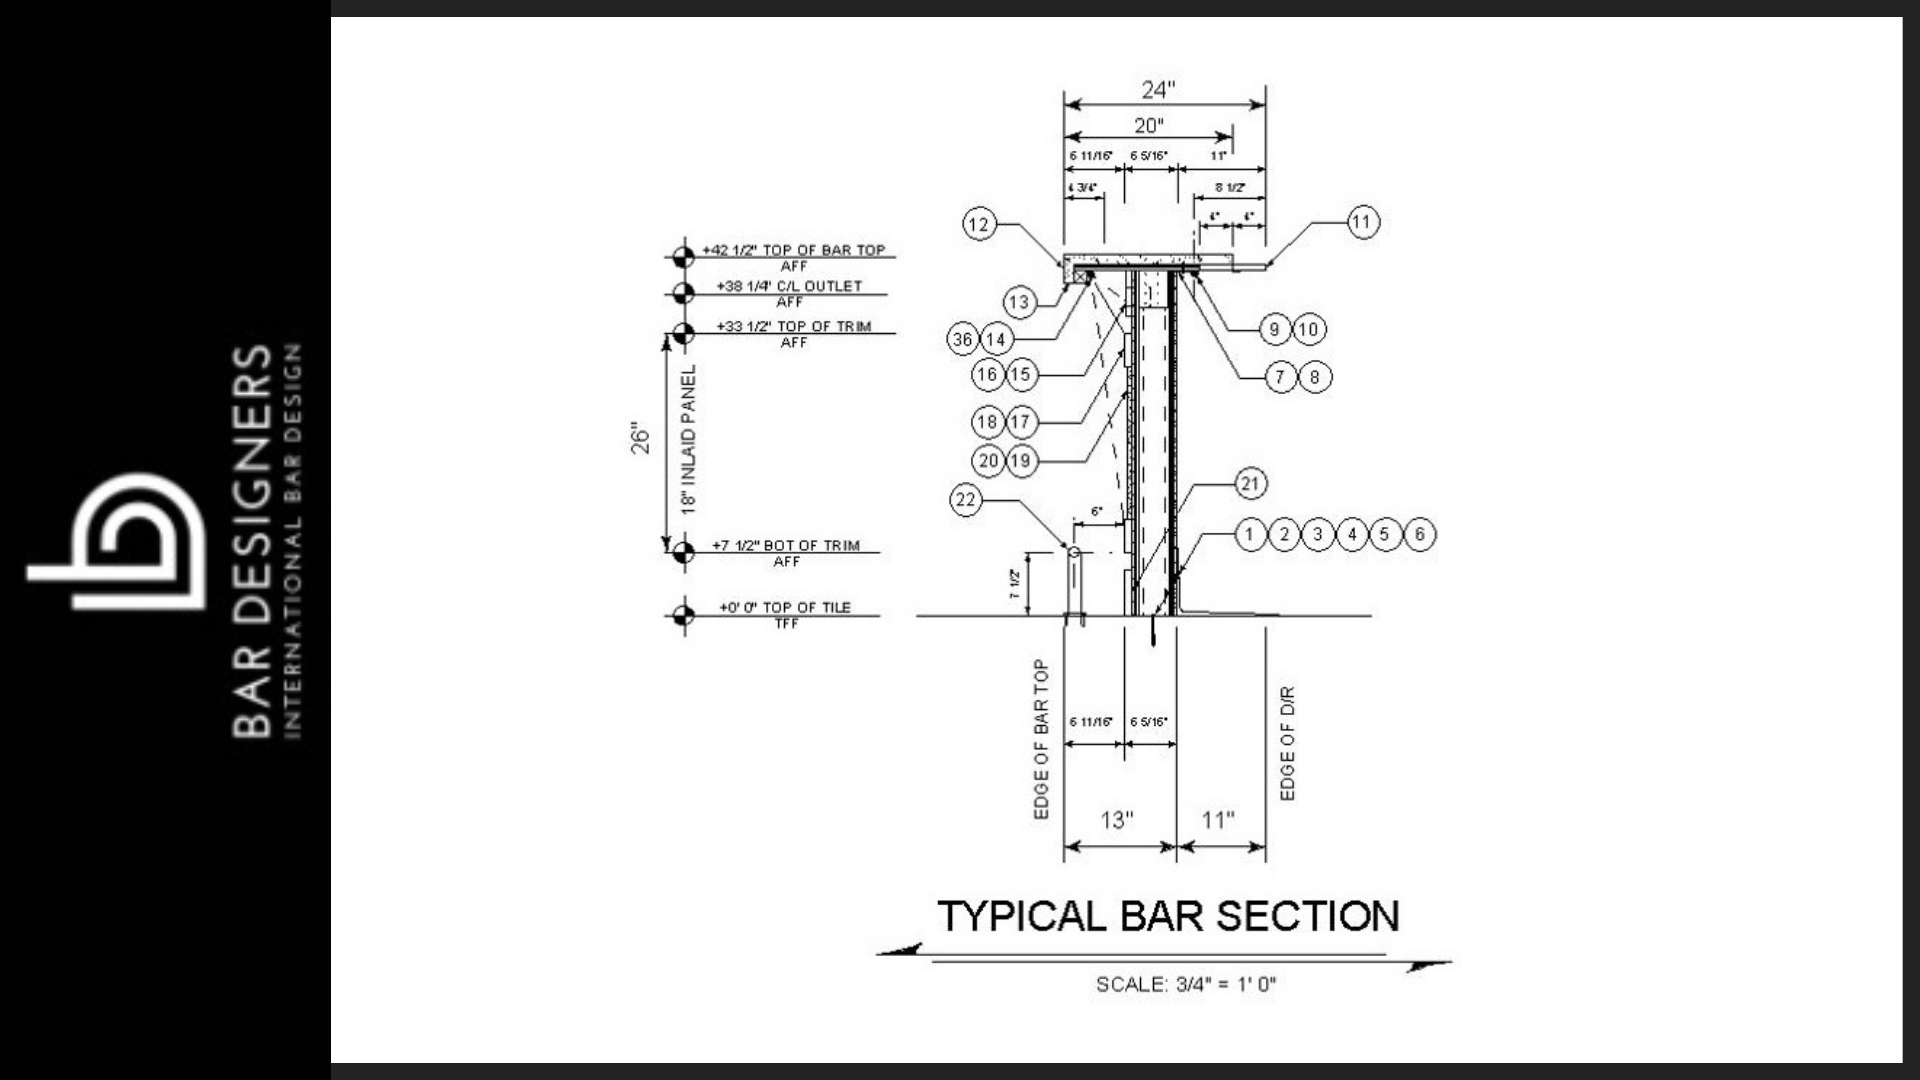 Architectural drawing of commercial bar  die using metal studs as framing members